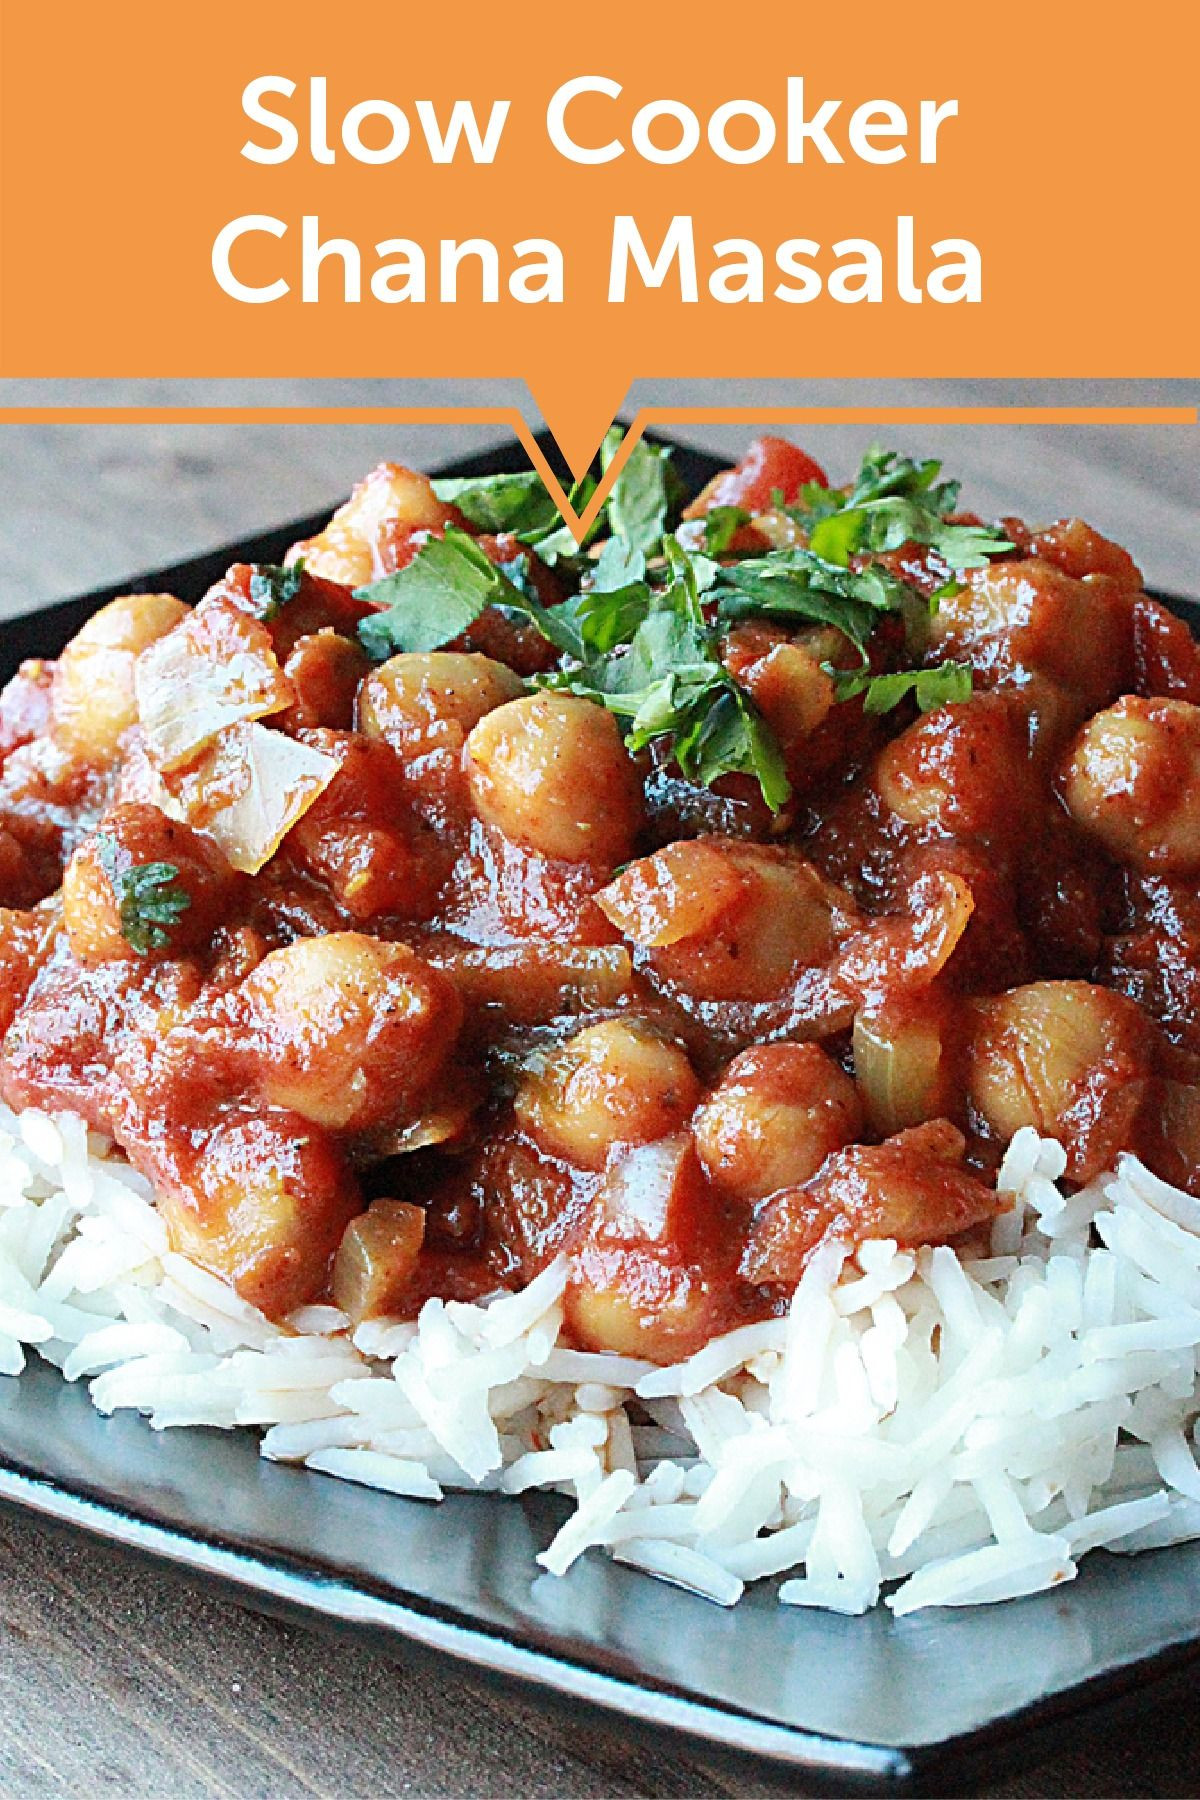 Slow Cooker Recipes Indian
 Chana Masala in the Slow Cooker Recipe